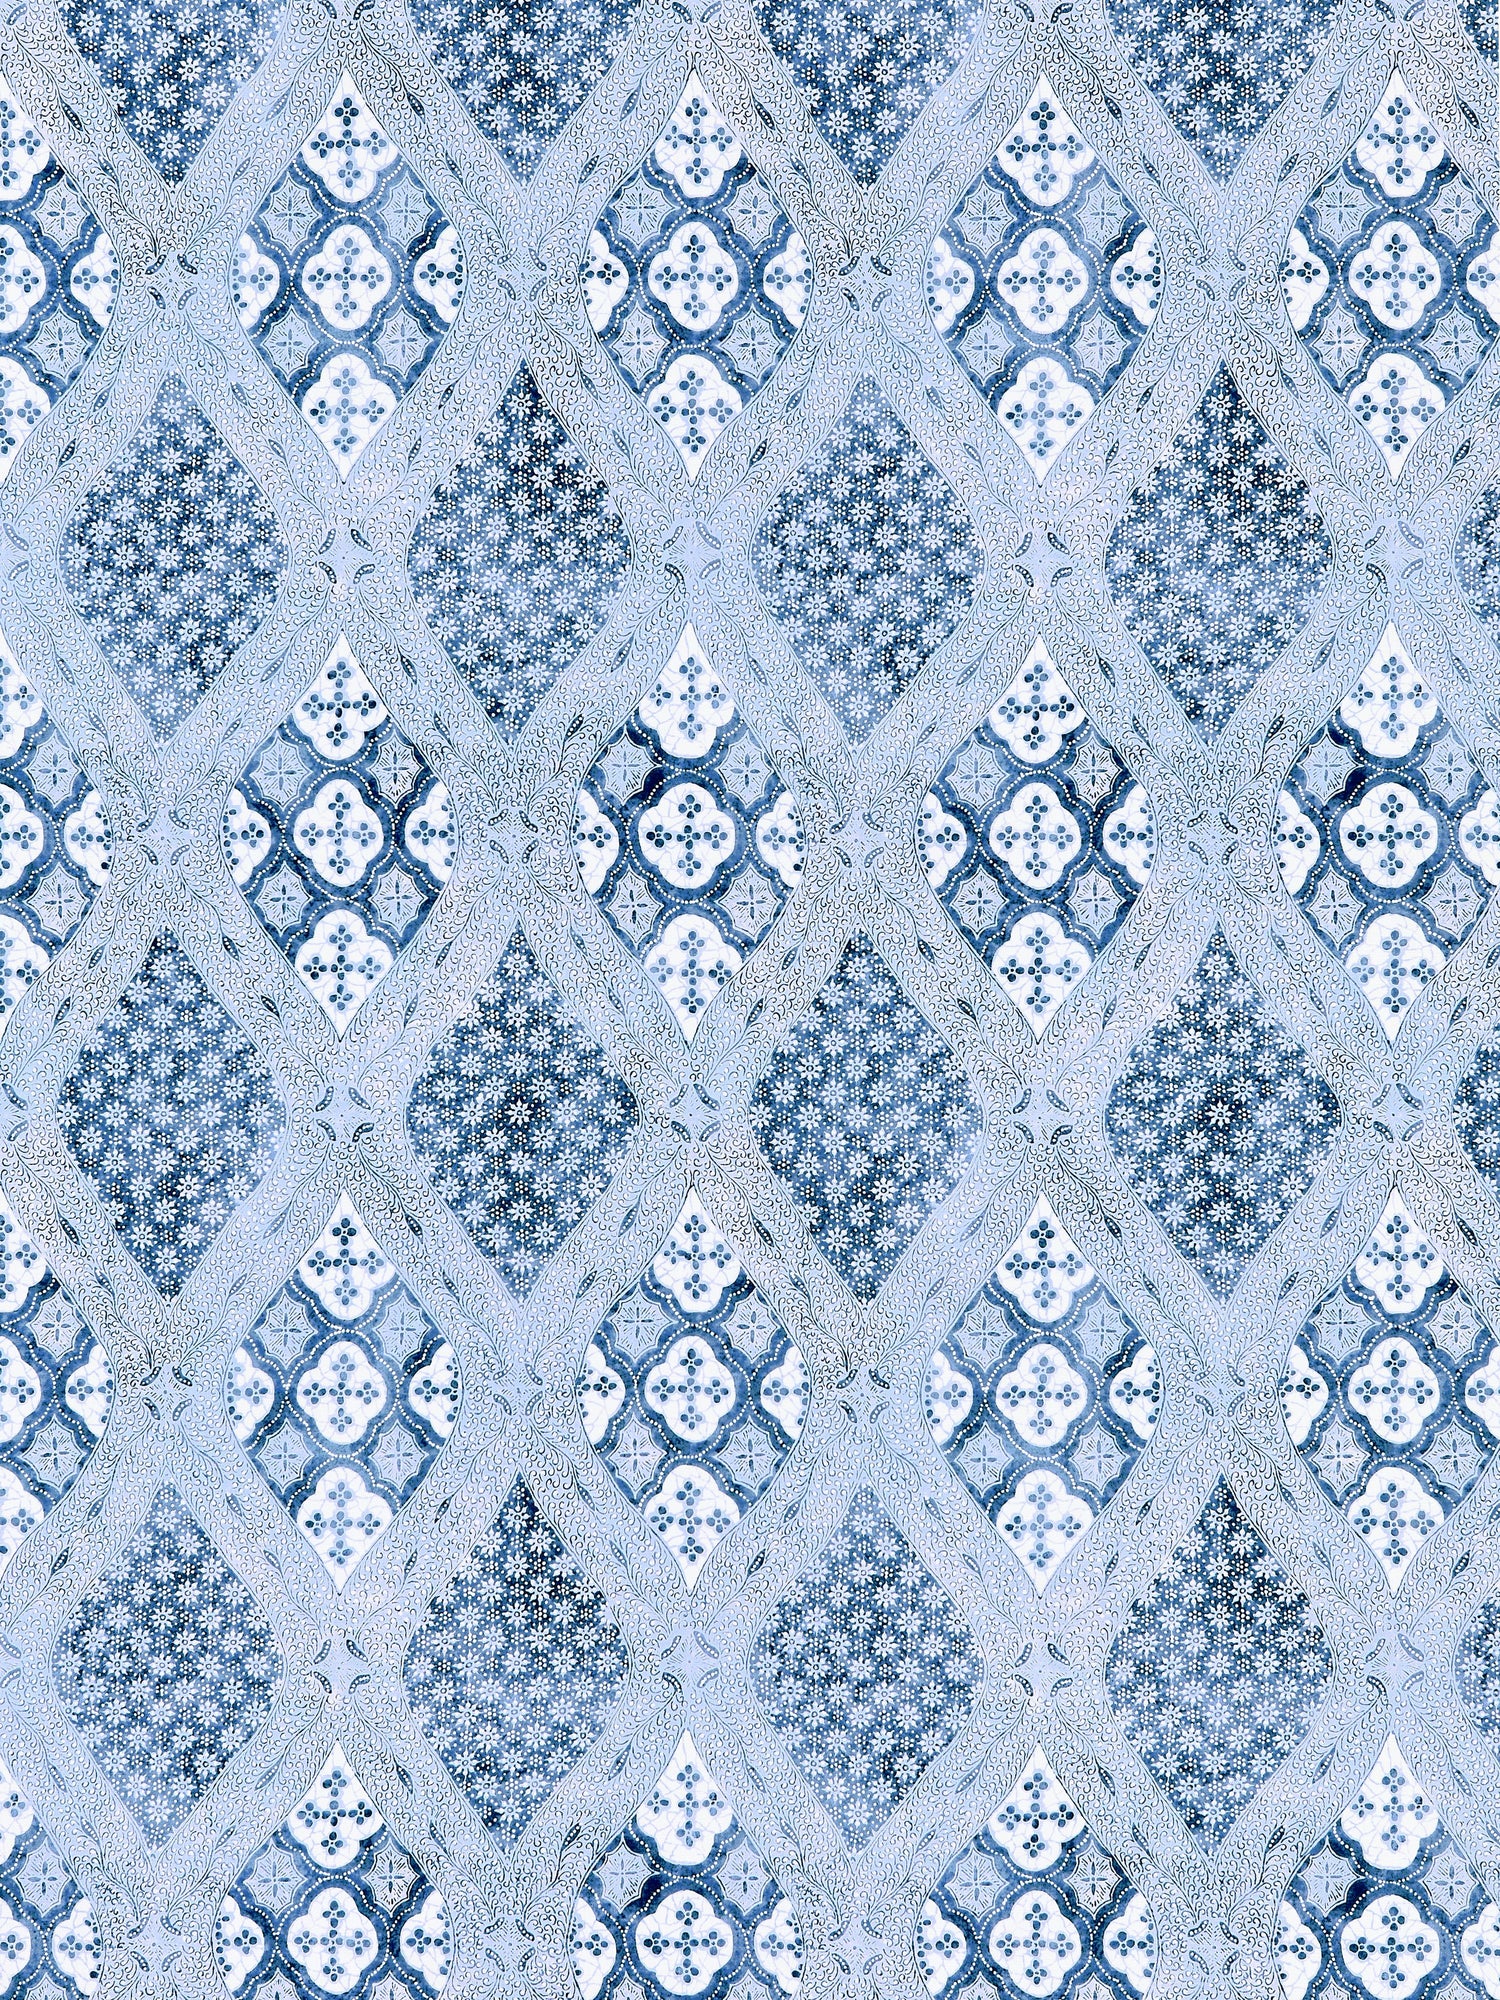 Farrah Print fabric in lakeside color - pattern number SC 000316626 - by Scalamandre in the Scalamandre Fabrics Book 1 collection